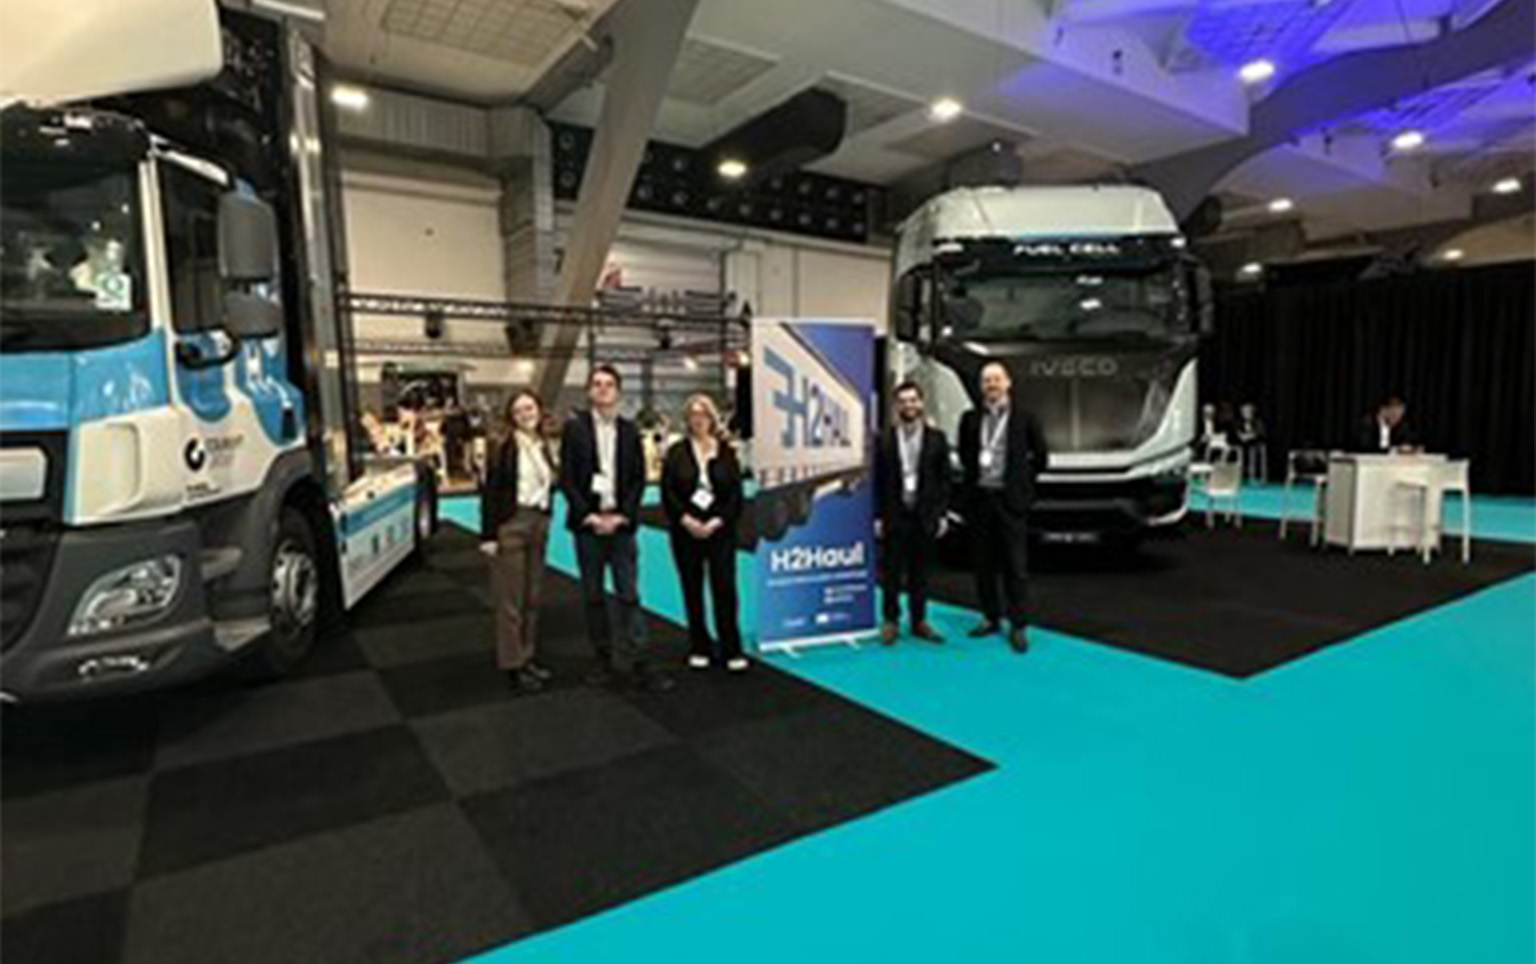 IRU research and innovation projects centre stage at European Hydrogen Week